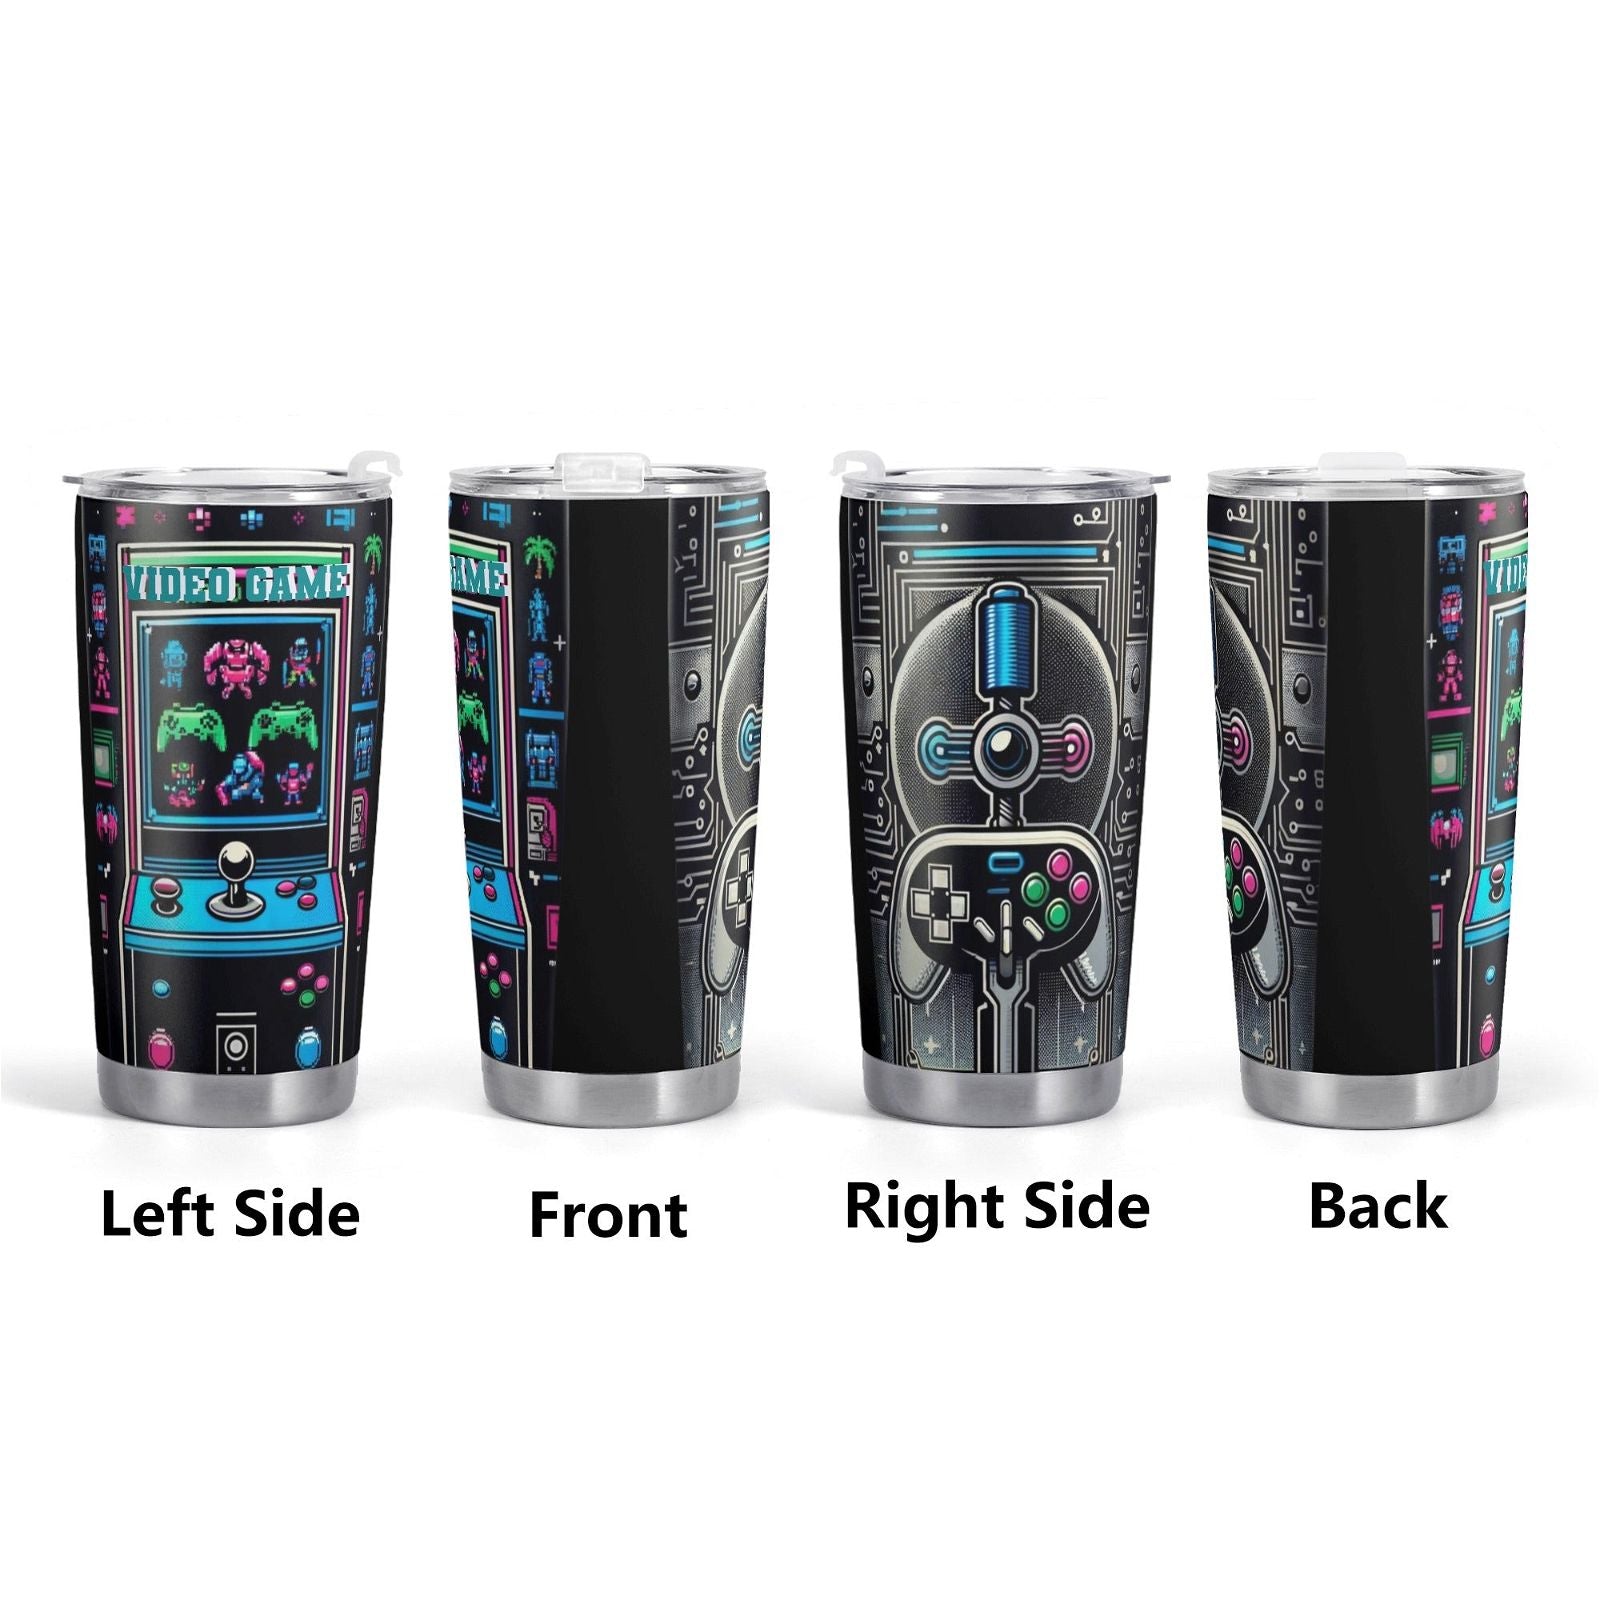 Gamer Inspired Car Cup  On-the-Go Gaming Fun - Iron Phoenix GHG